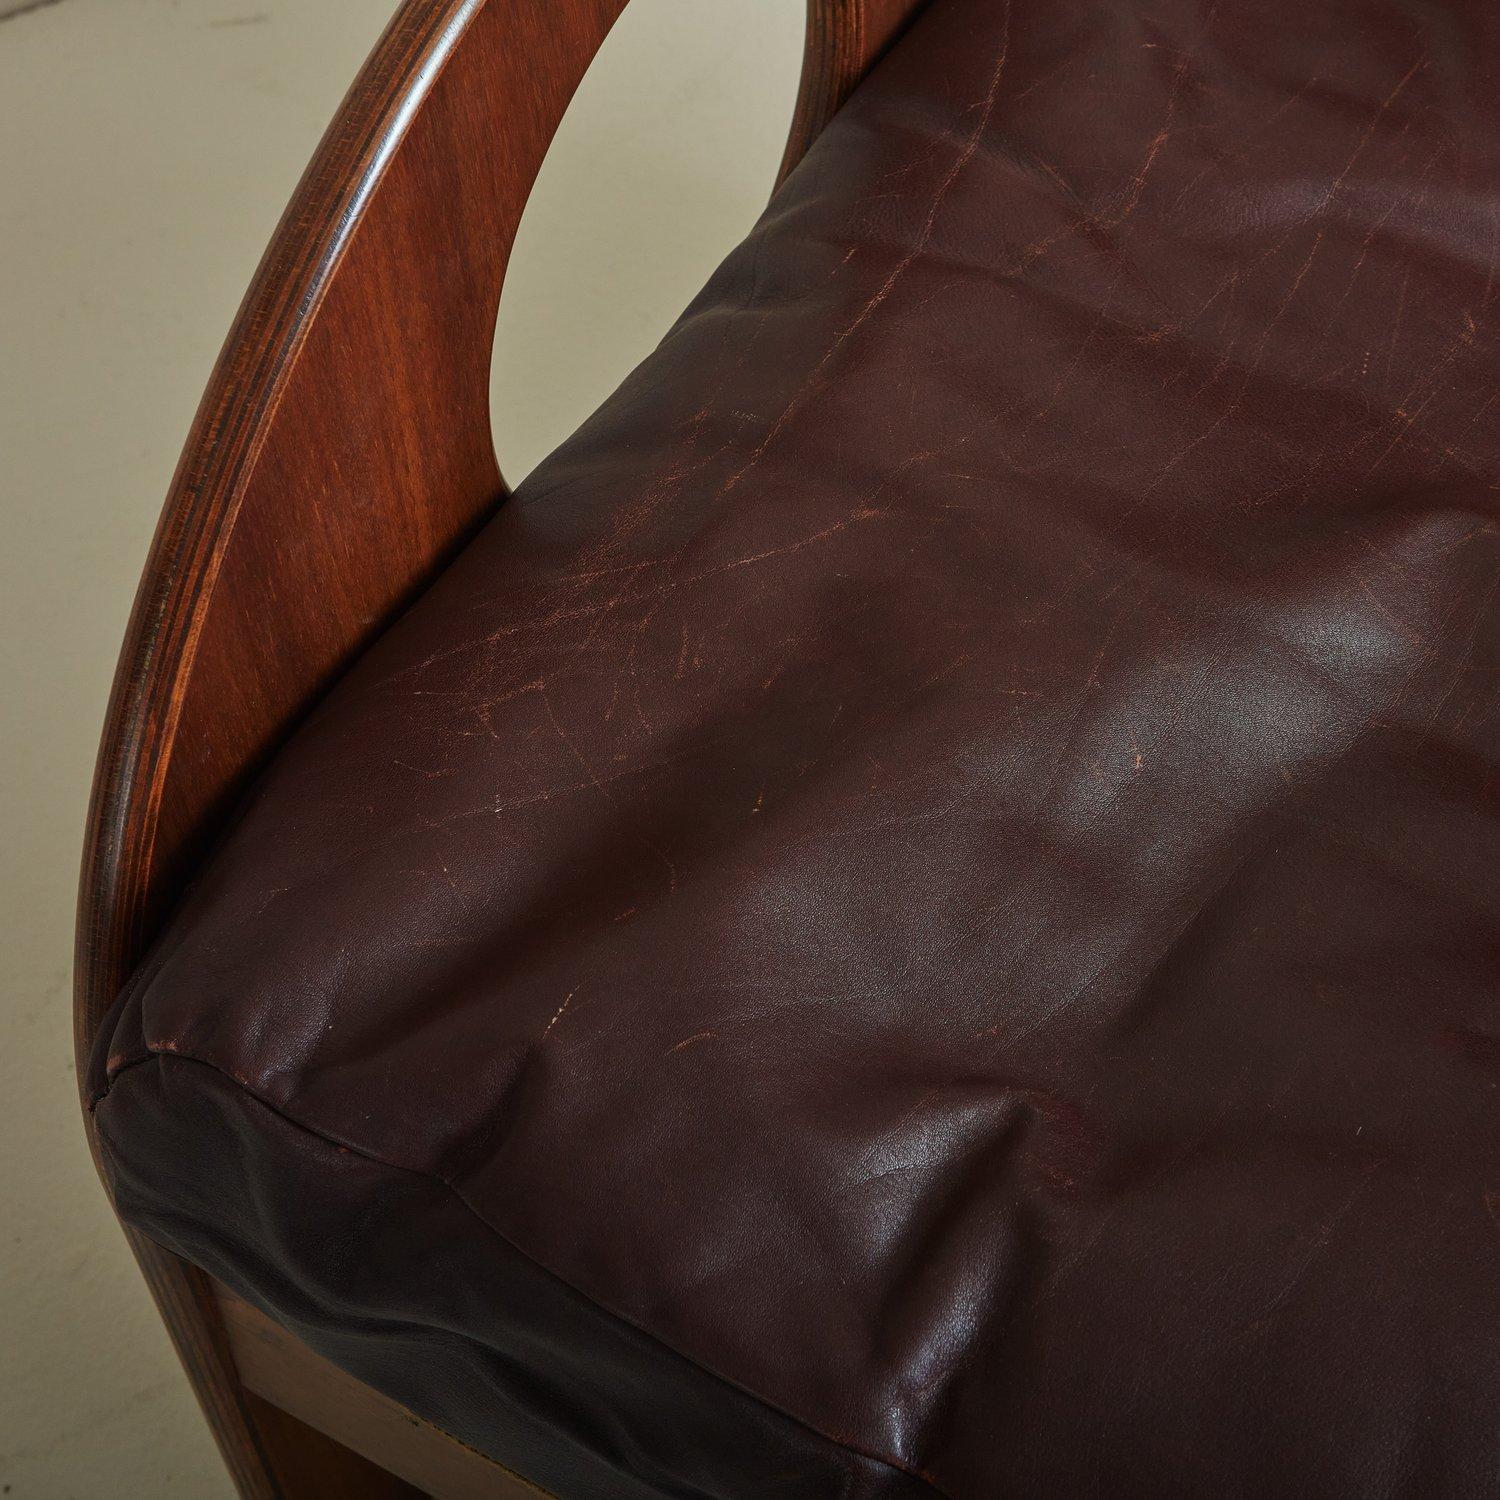 Walnut + Leather 'Arcata' Chair by Gae Aulenti for Poltronova, Italy 1968 For Sale 6